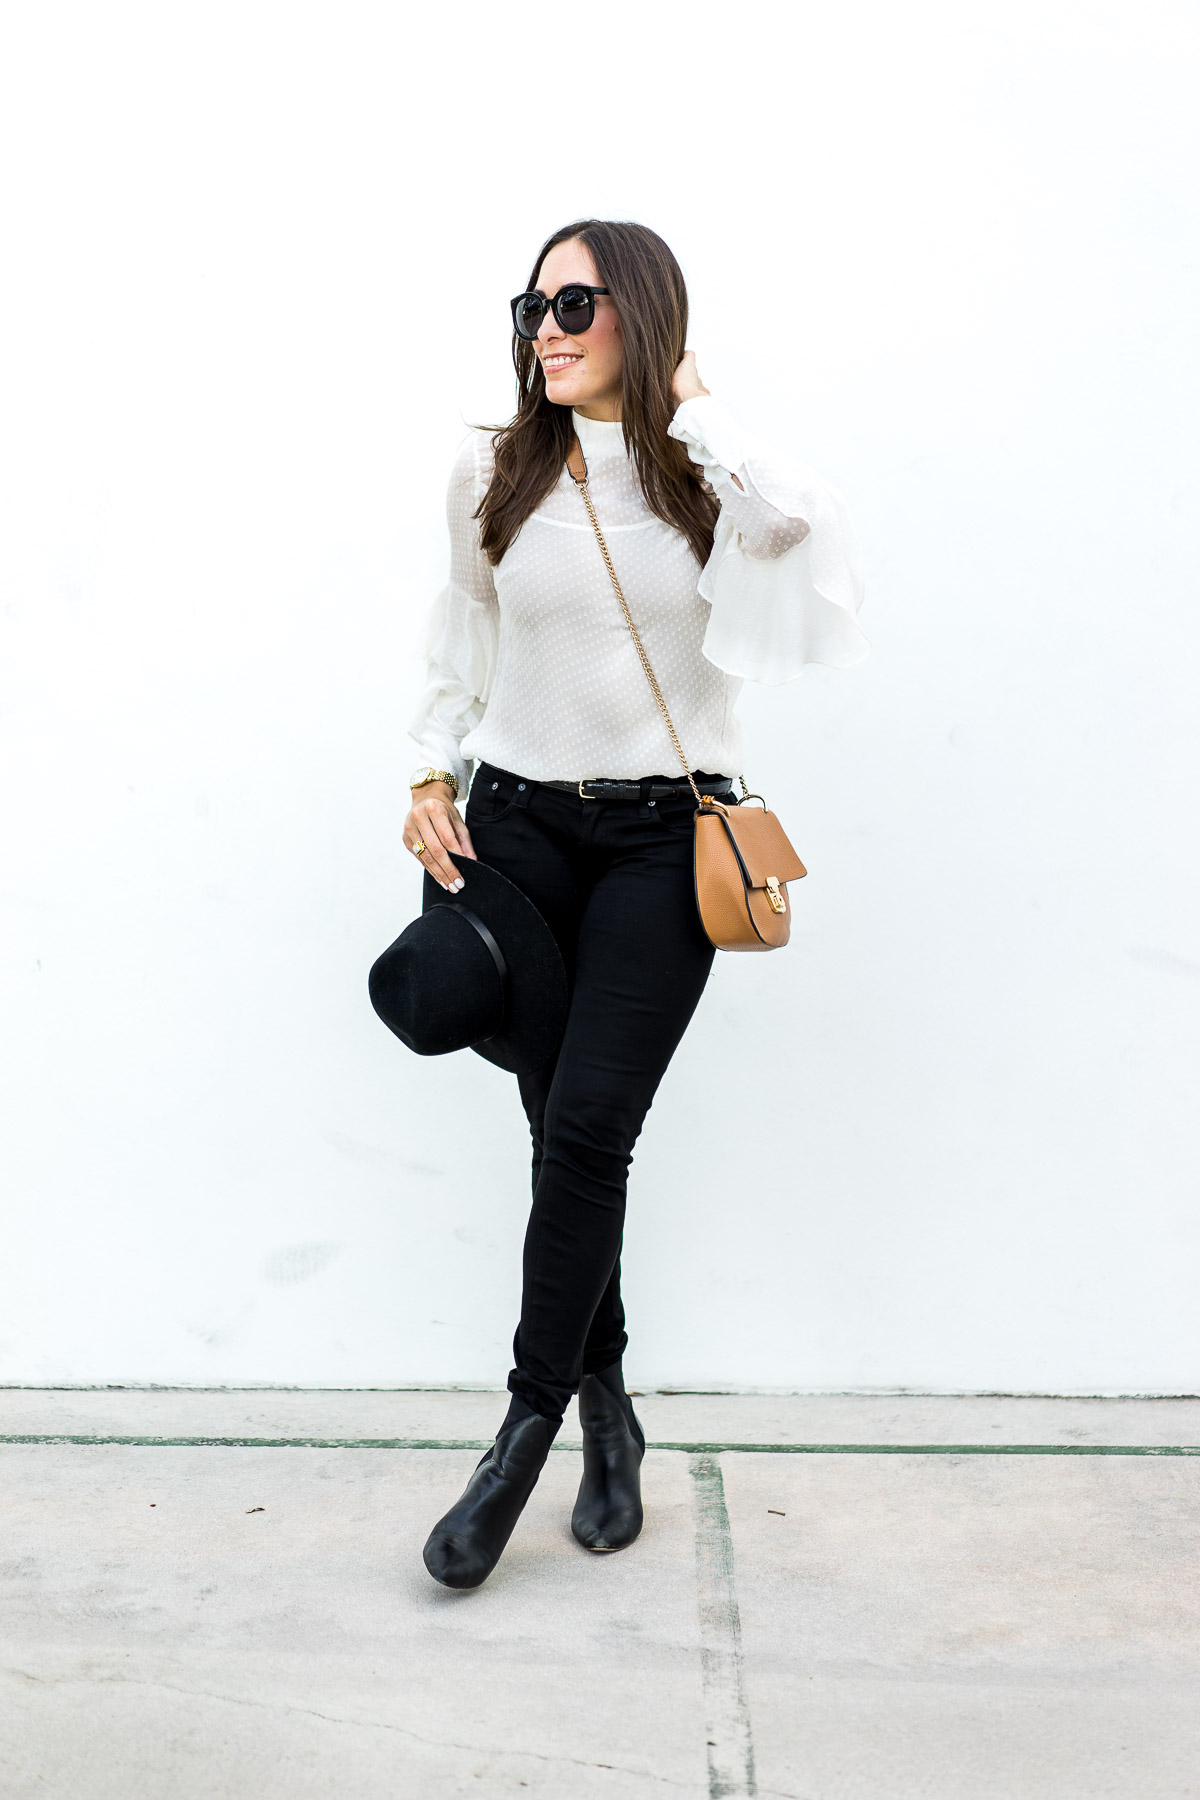 Amanda from A Glam Lifestyle wears sheer white blouse and accesorizes with Rag and Bone black fedora and Chloe drew bag dupe